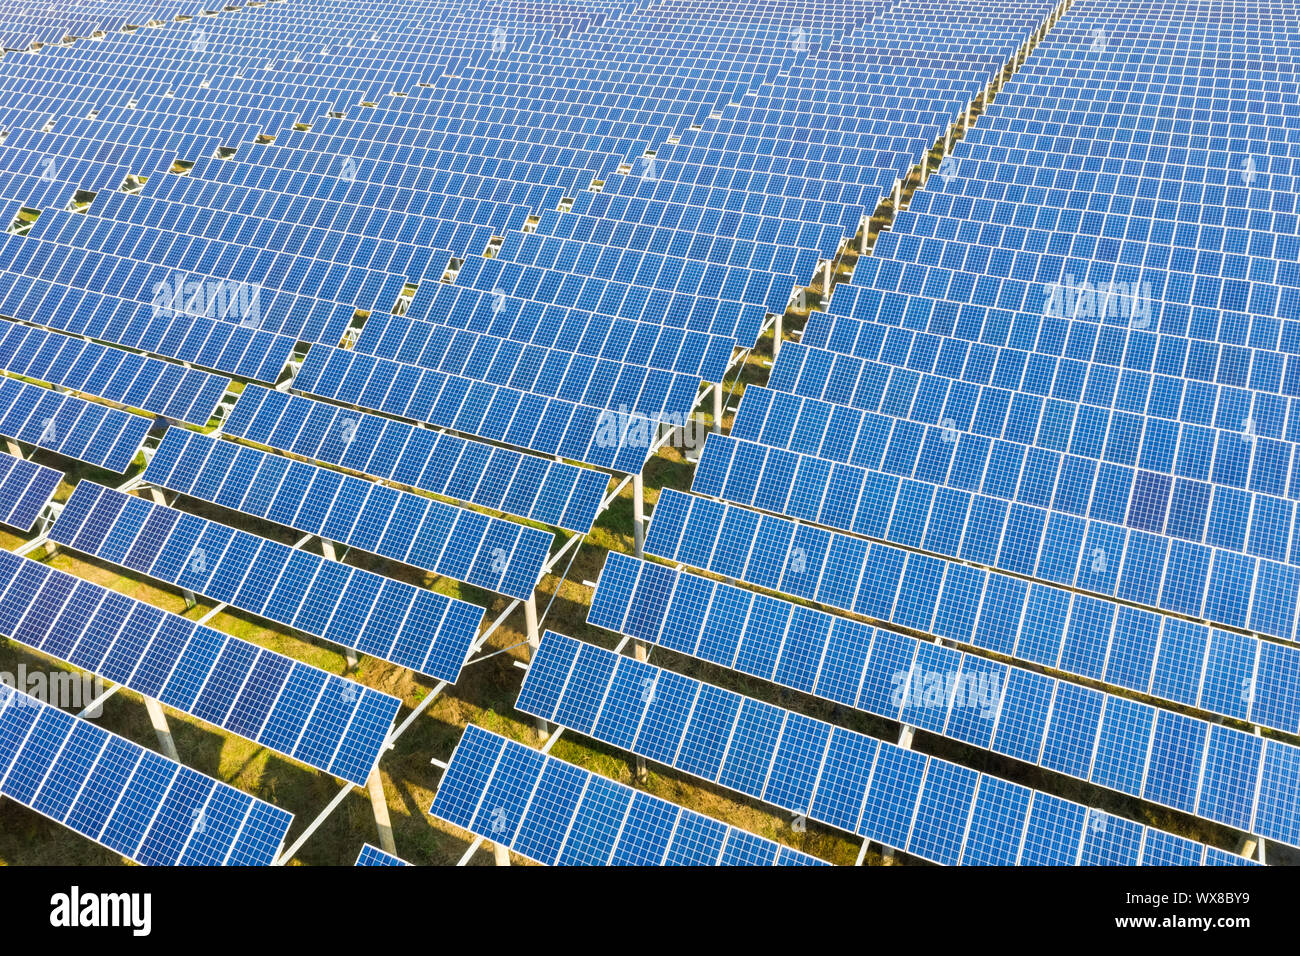 arrays of blue solar panels on photovoltaic power station Stock Photo